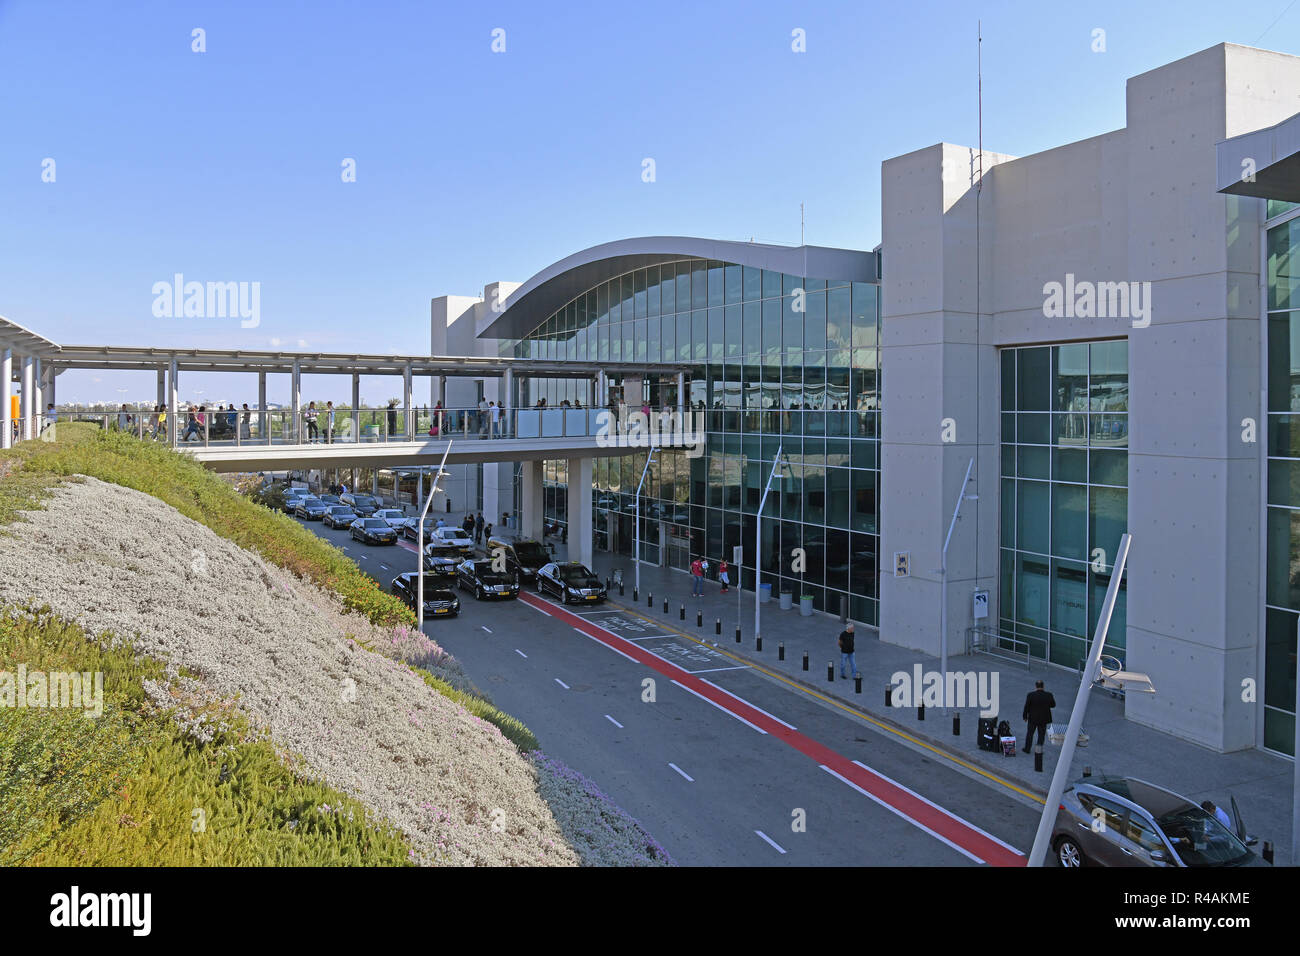 Larnaca, Cyprus - November 6. 2018. Appearance of the international airport Stock Photo